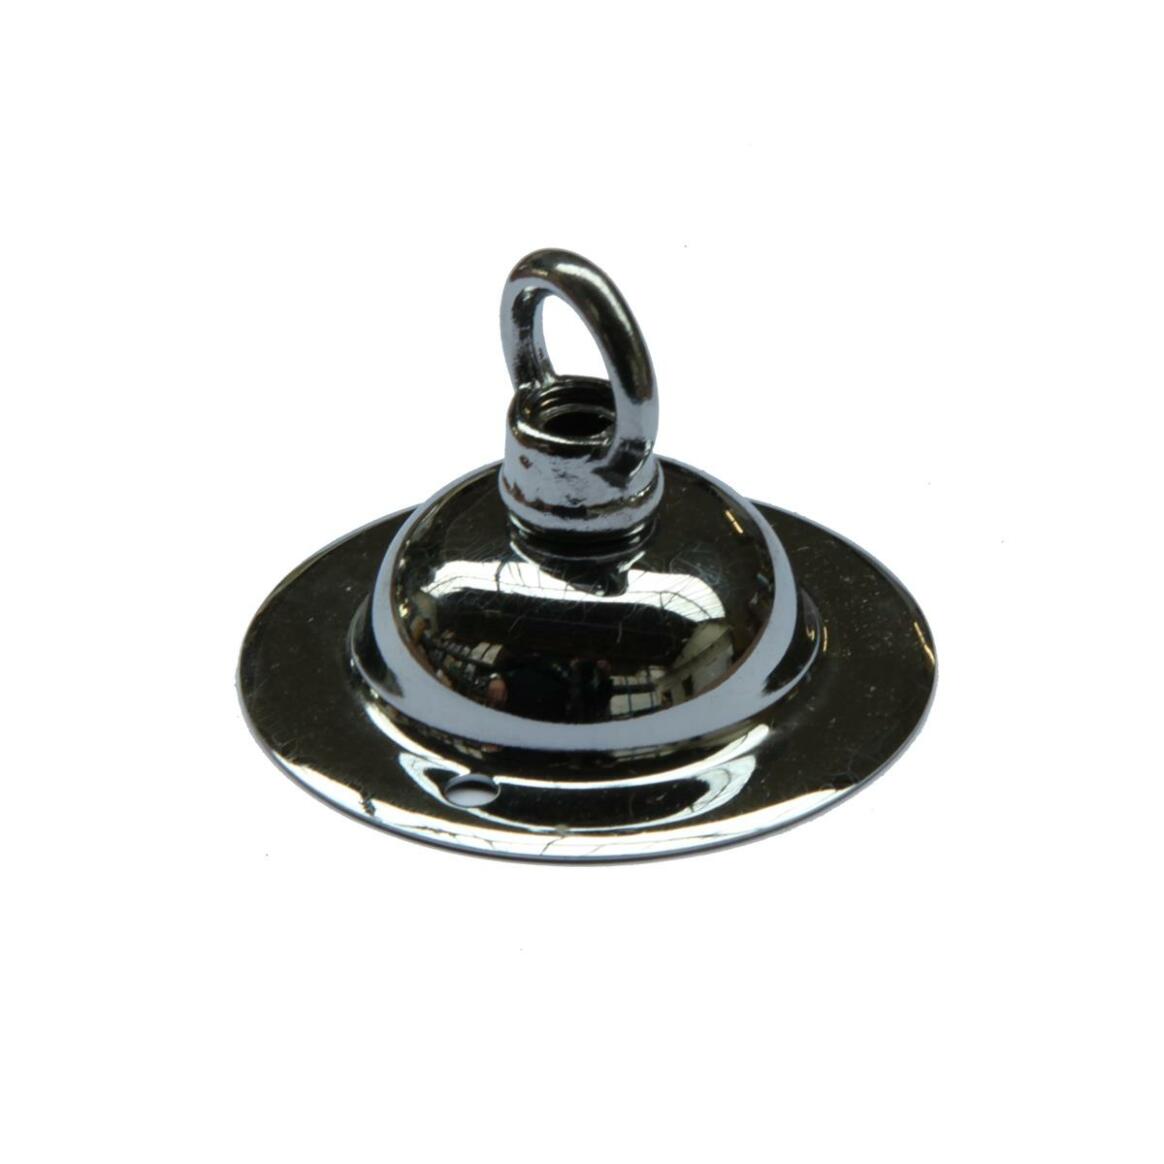 Chrome plated ceiling rose with closed hook main product image